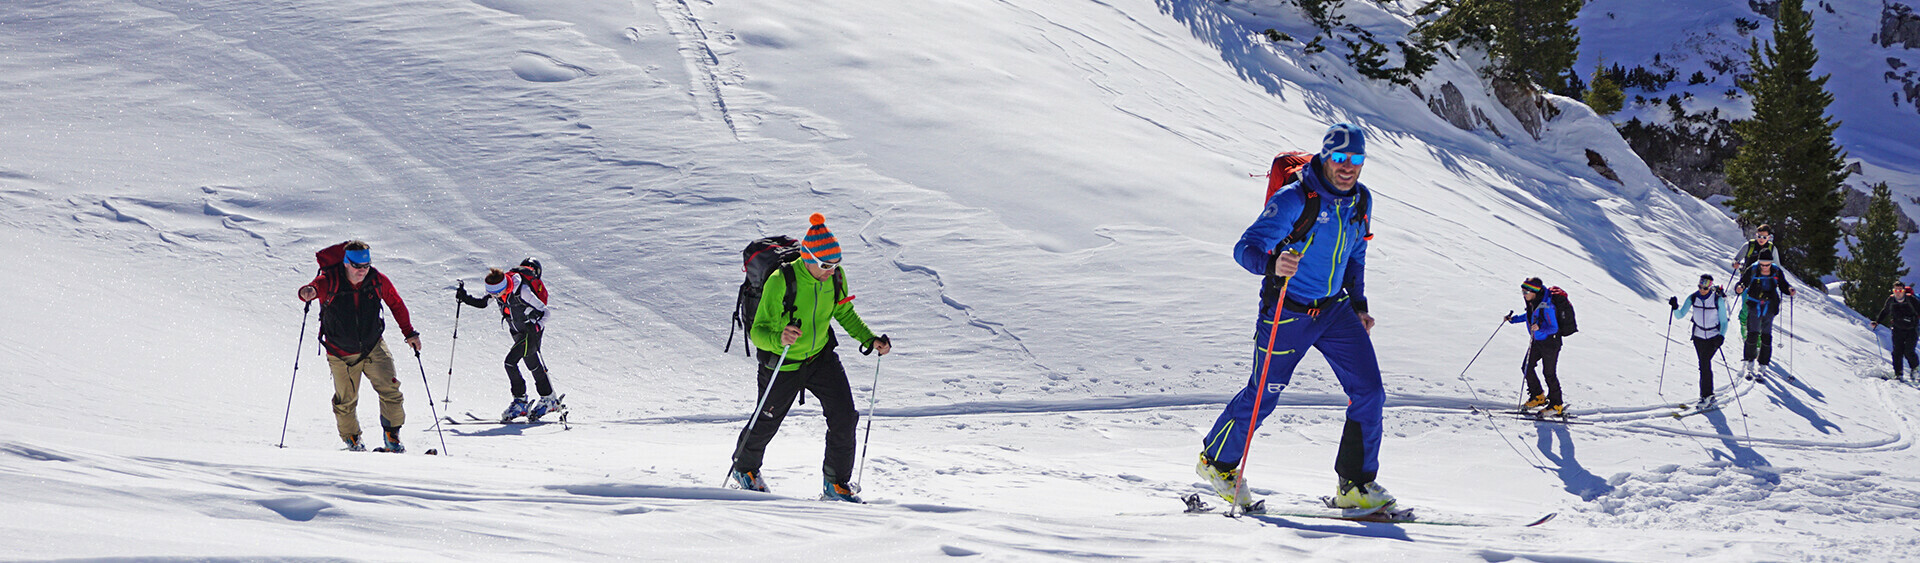 A ski tour in the middle of the winter landscape of the Rofan mountains is a special experience.